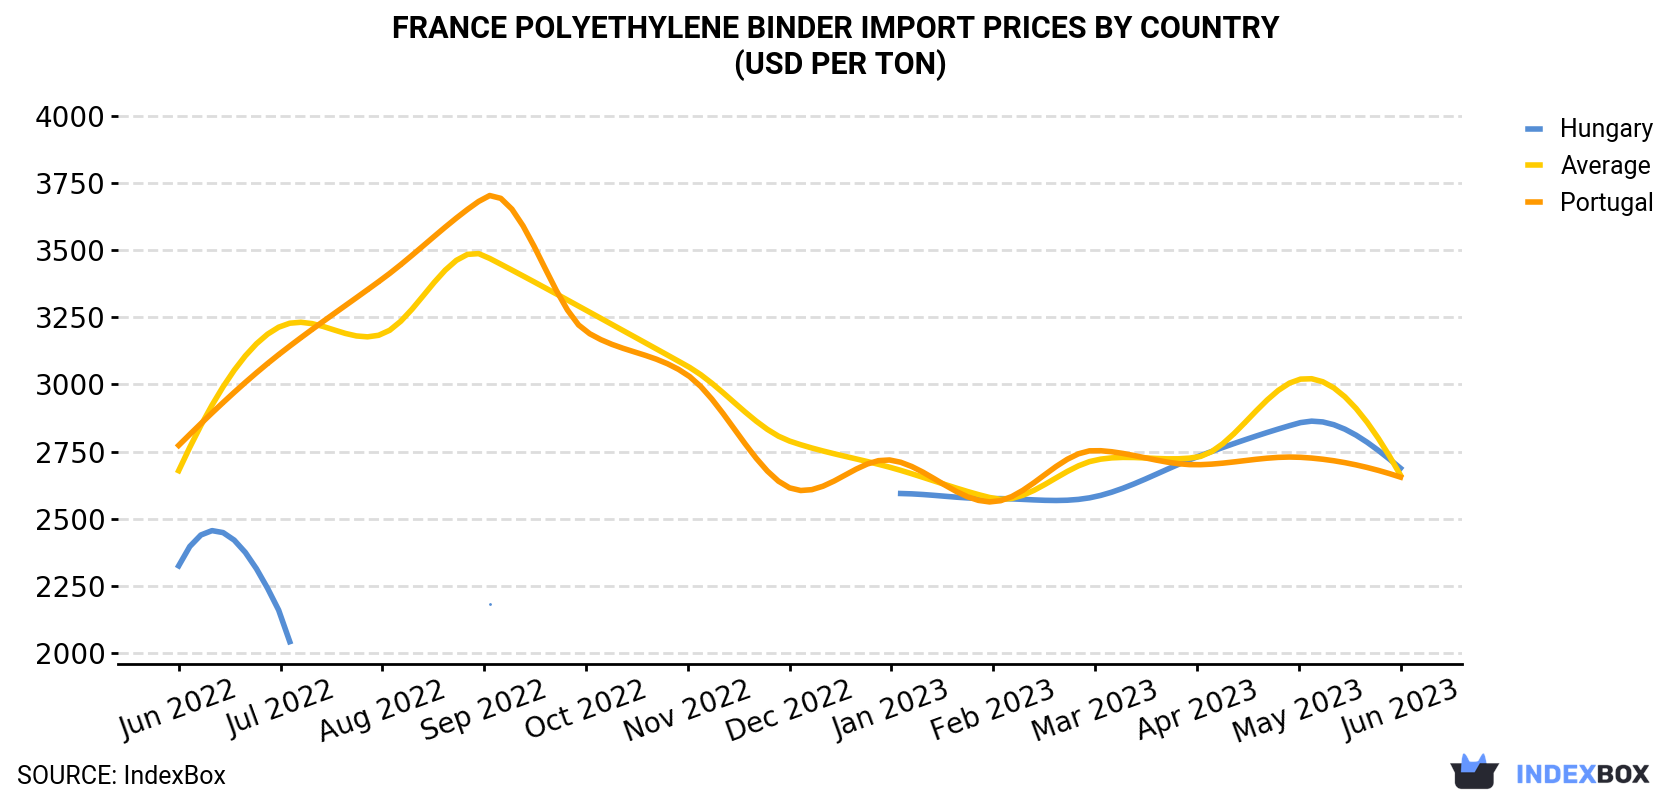 France Polyethylene Binder Import Prices By Country (USD Per Ton)